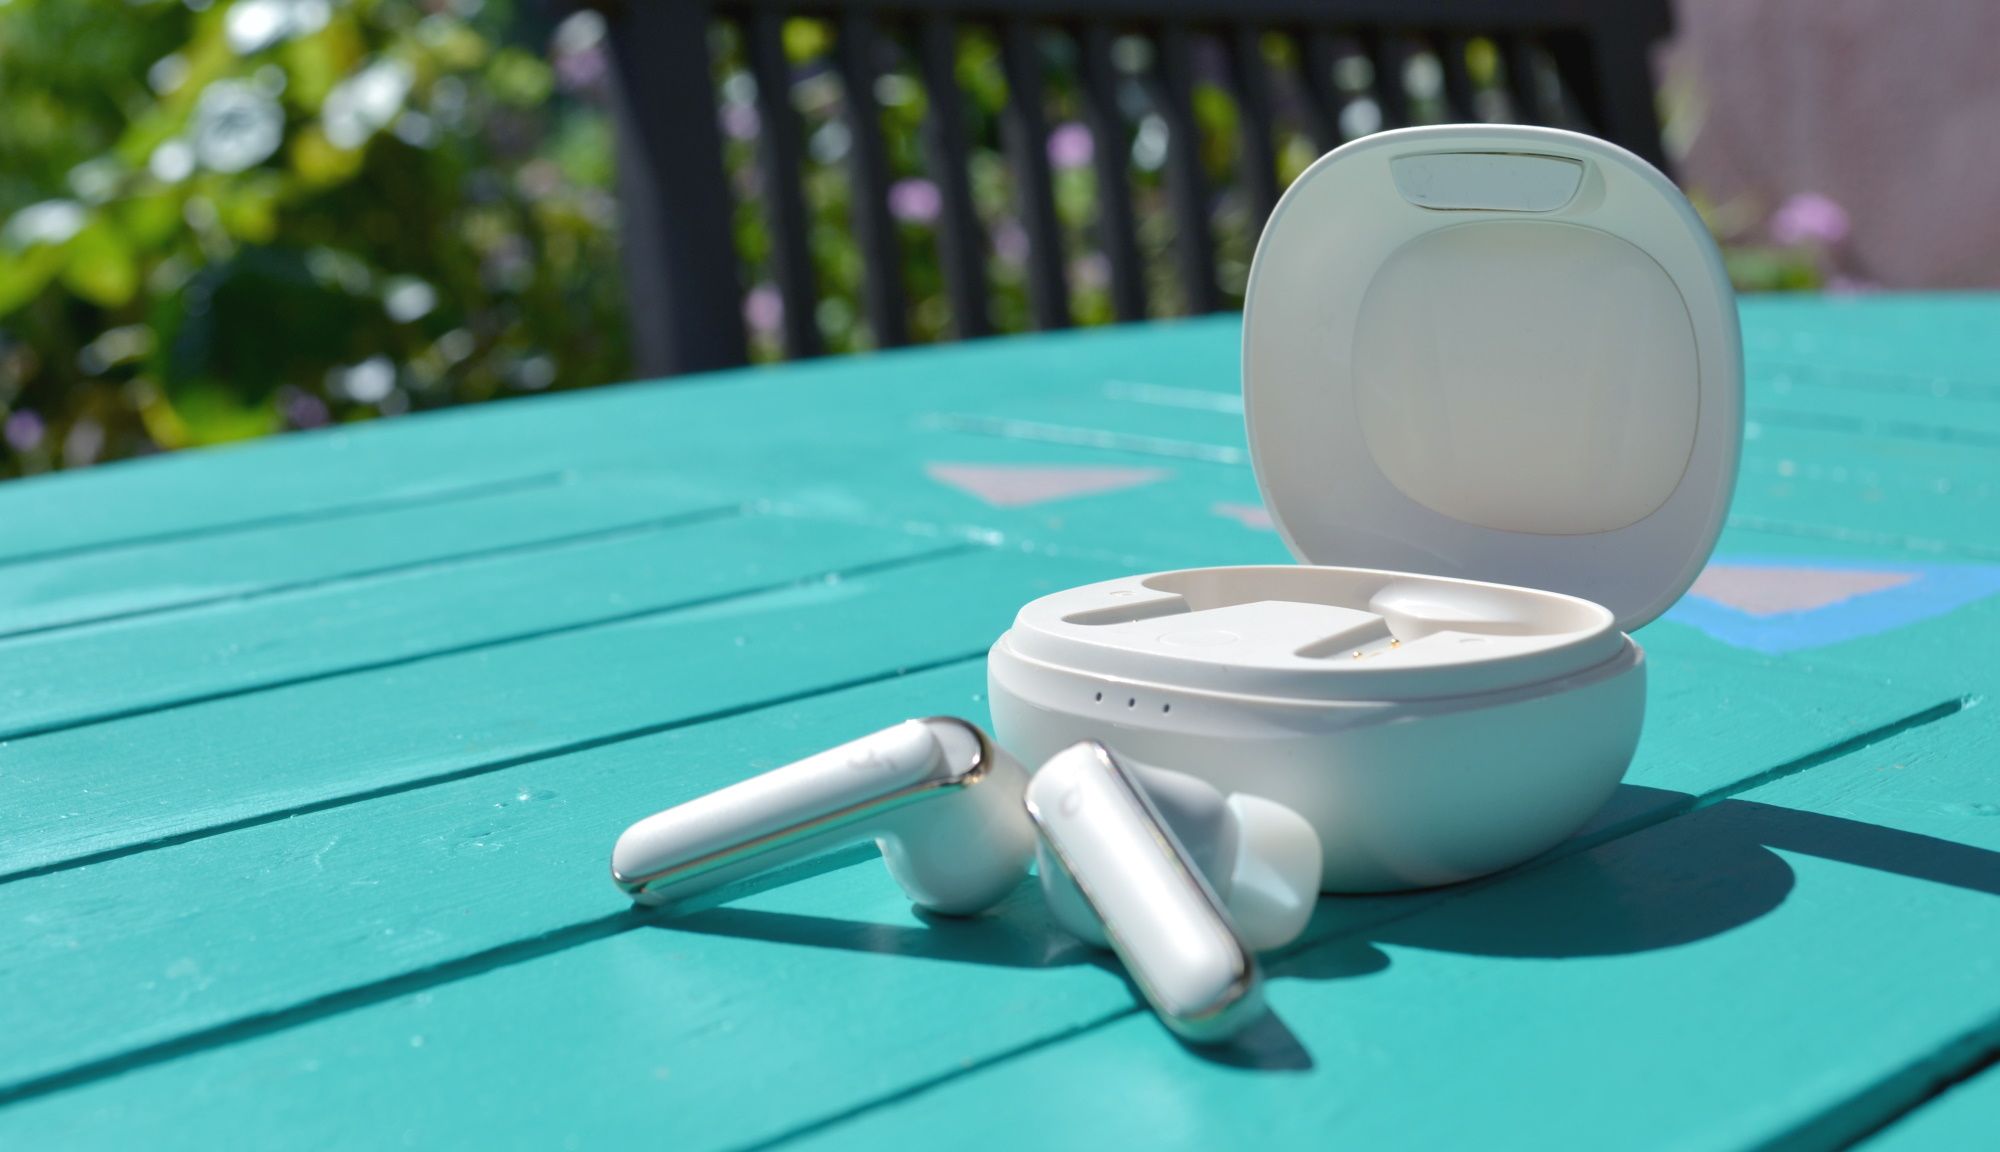 Anker Soundcore Life P3 Review